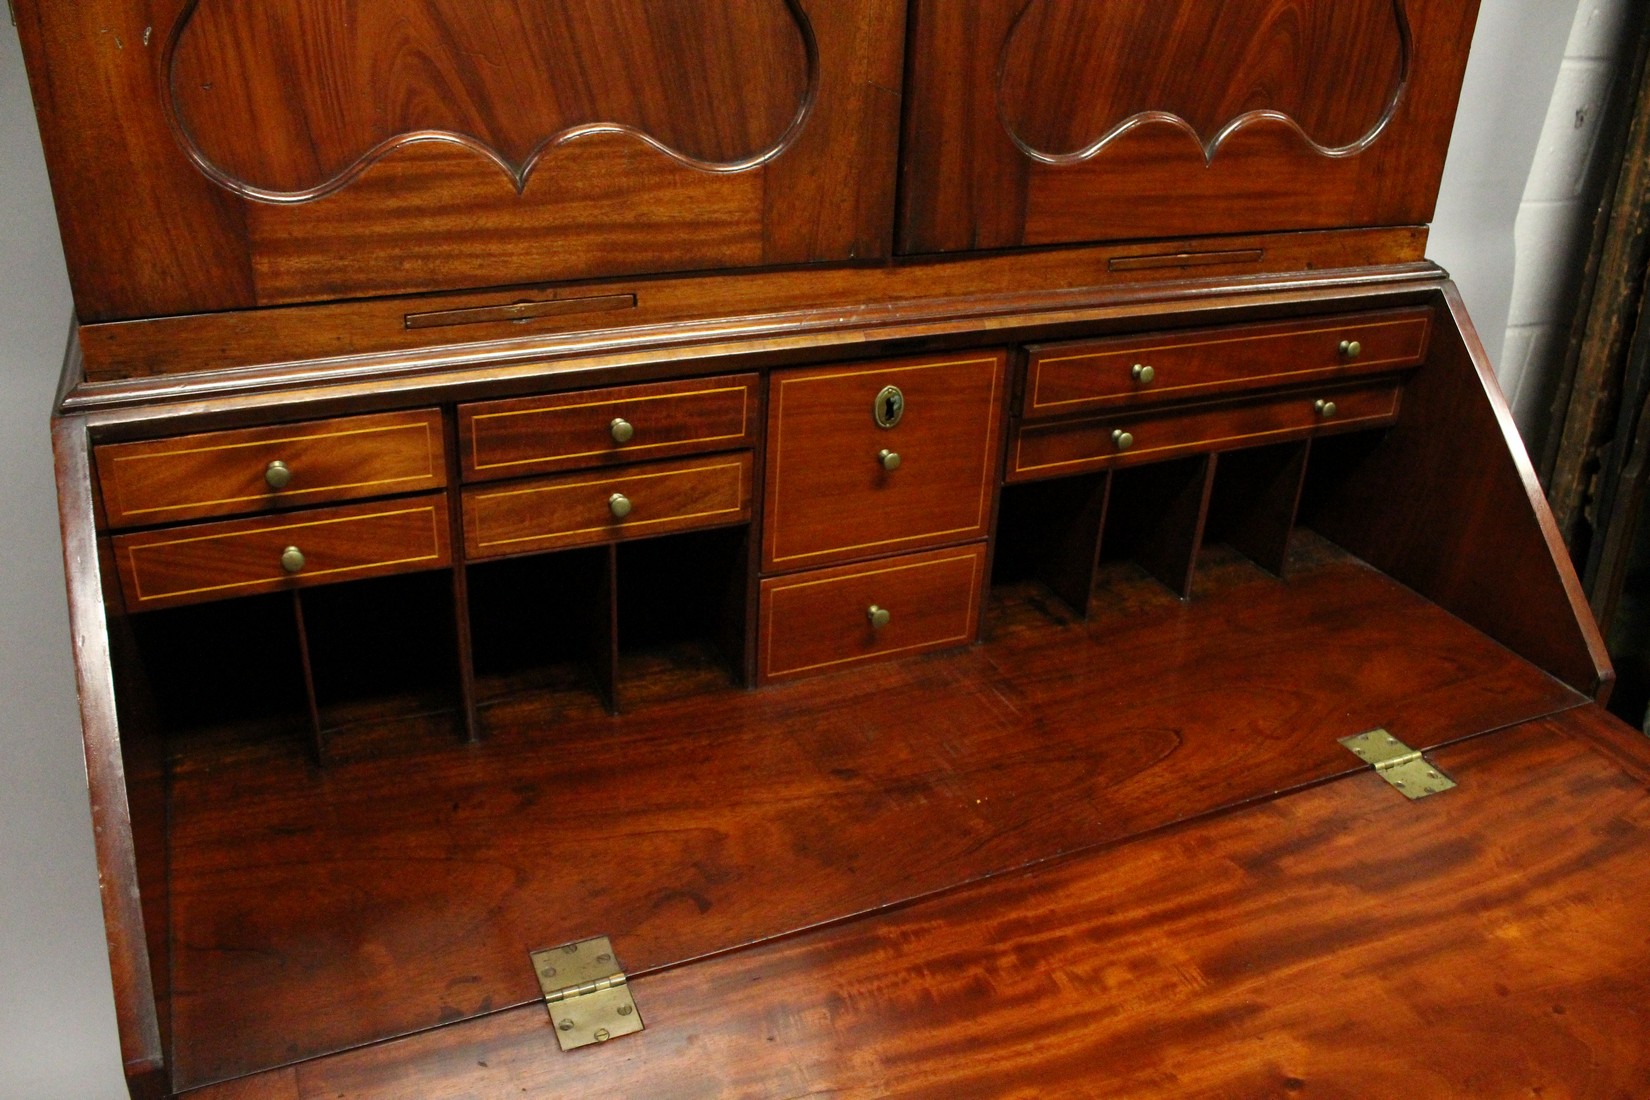 A SUPERB 18TH CENTURY AMERICAN, BOSTON, MAHOGANY, BUREAU BOOKCASE, the top with shaped cornice - Image 5 of 15